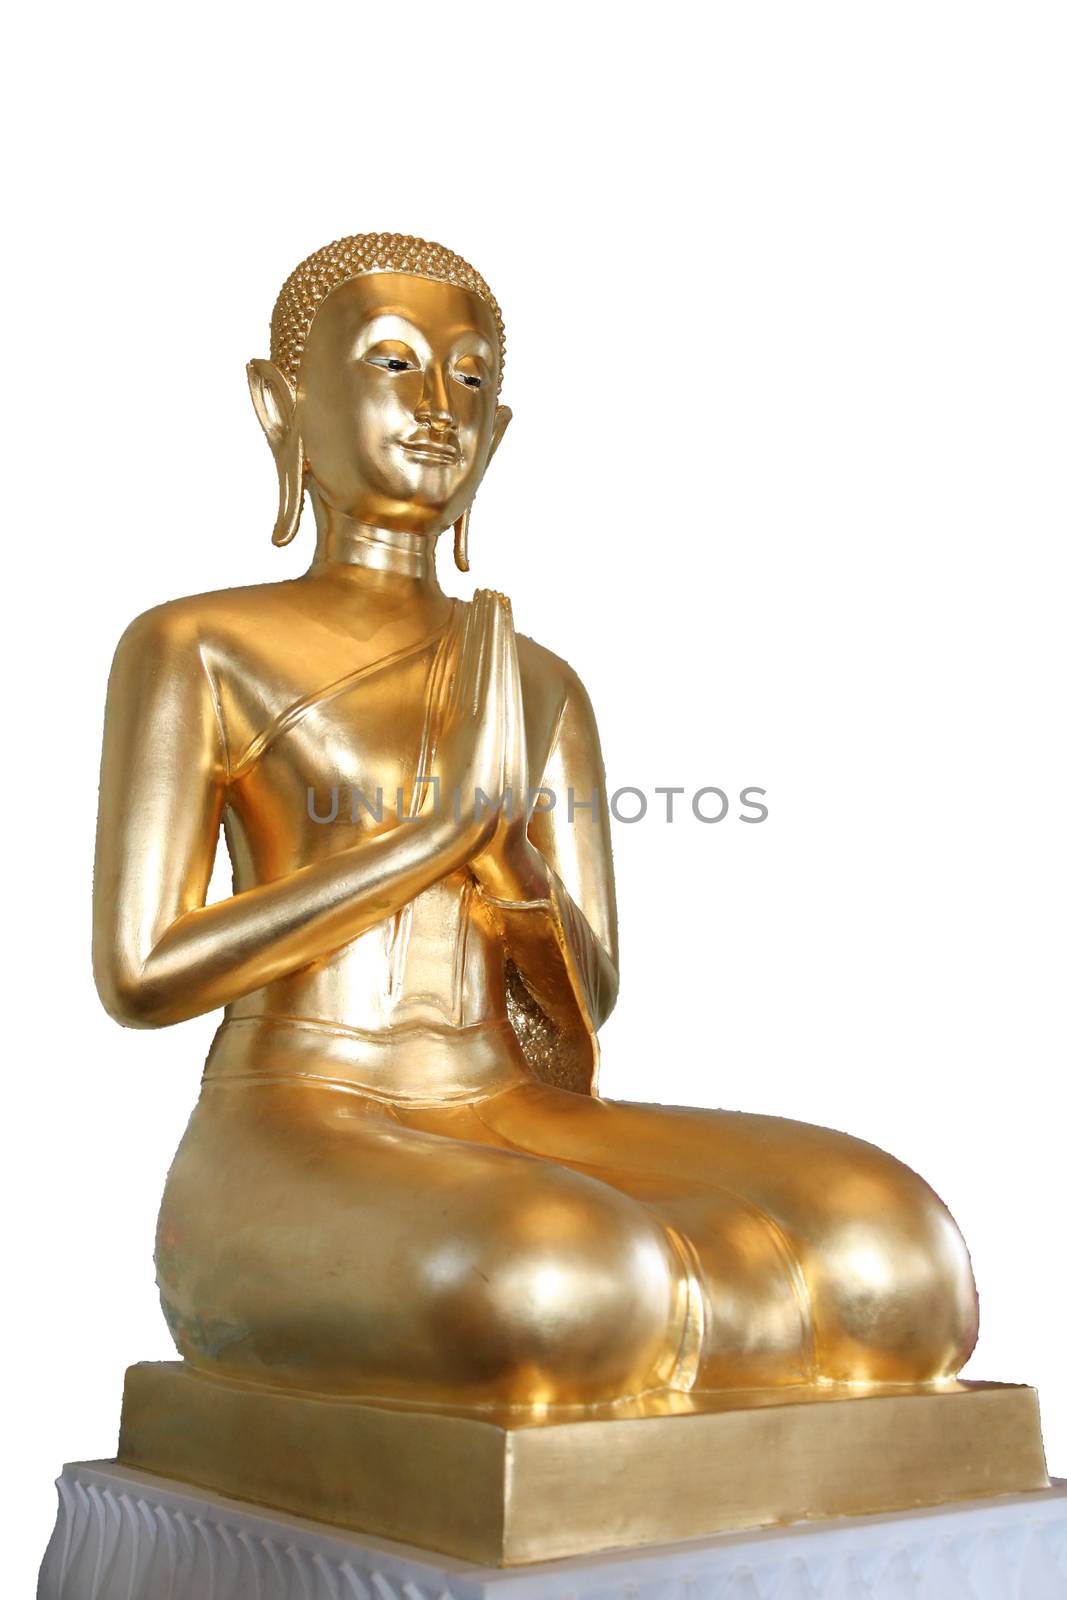 Budda gold in temple thailand on white background